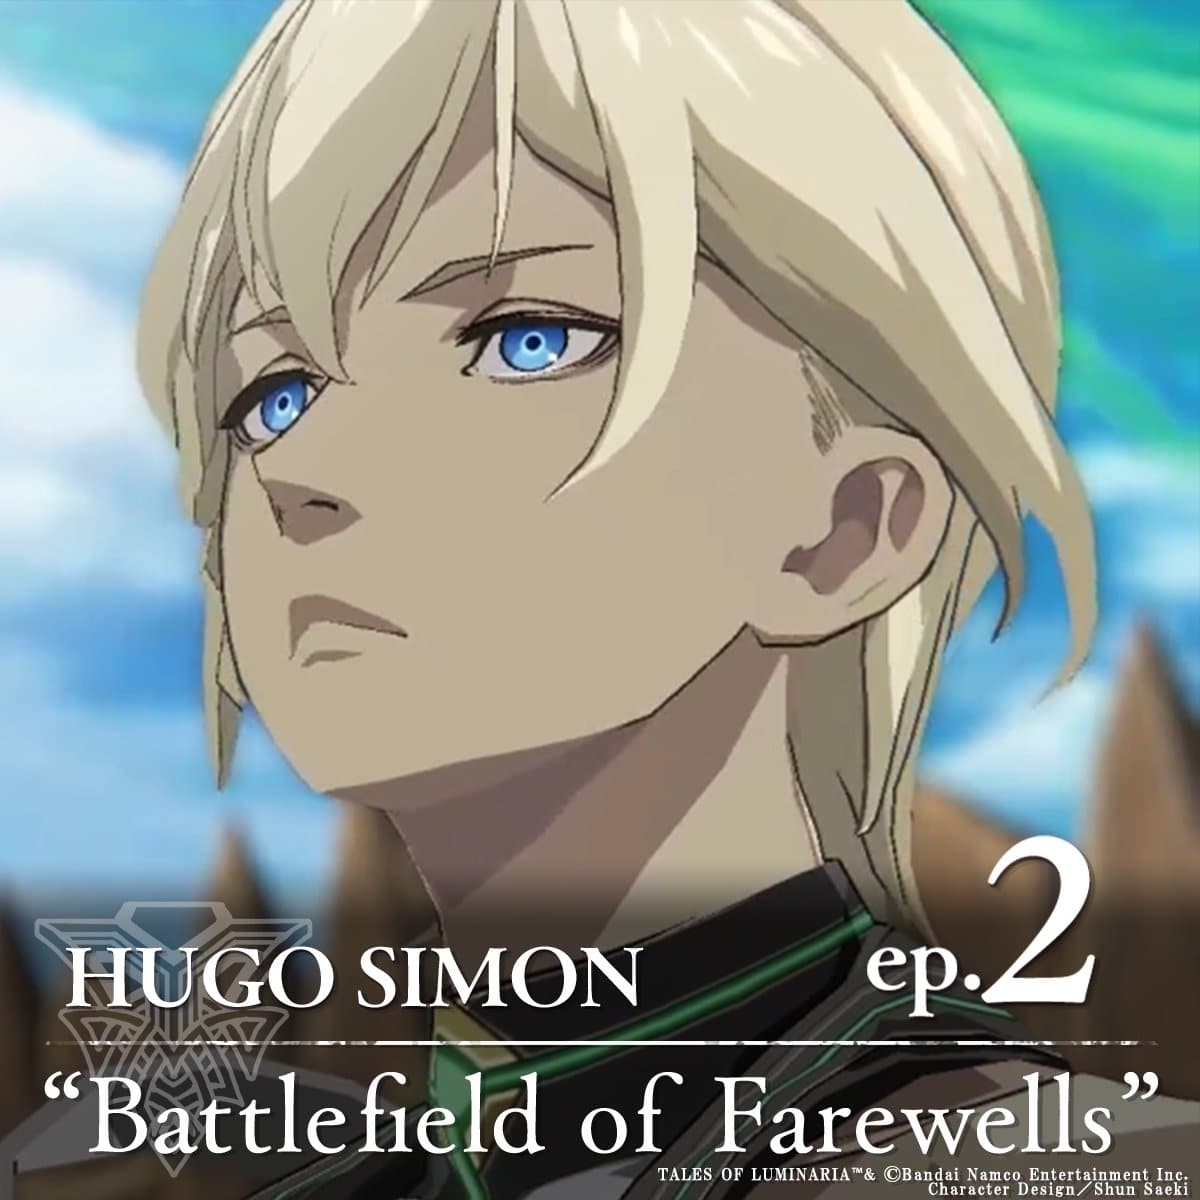 New Tales of Luminaria Update Available; Hugo Episode 2 “Battlefield of Farewells”